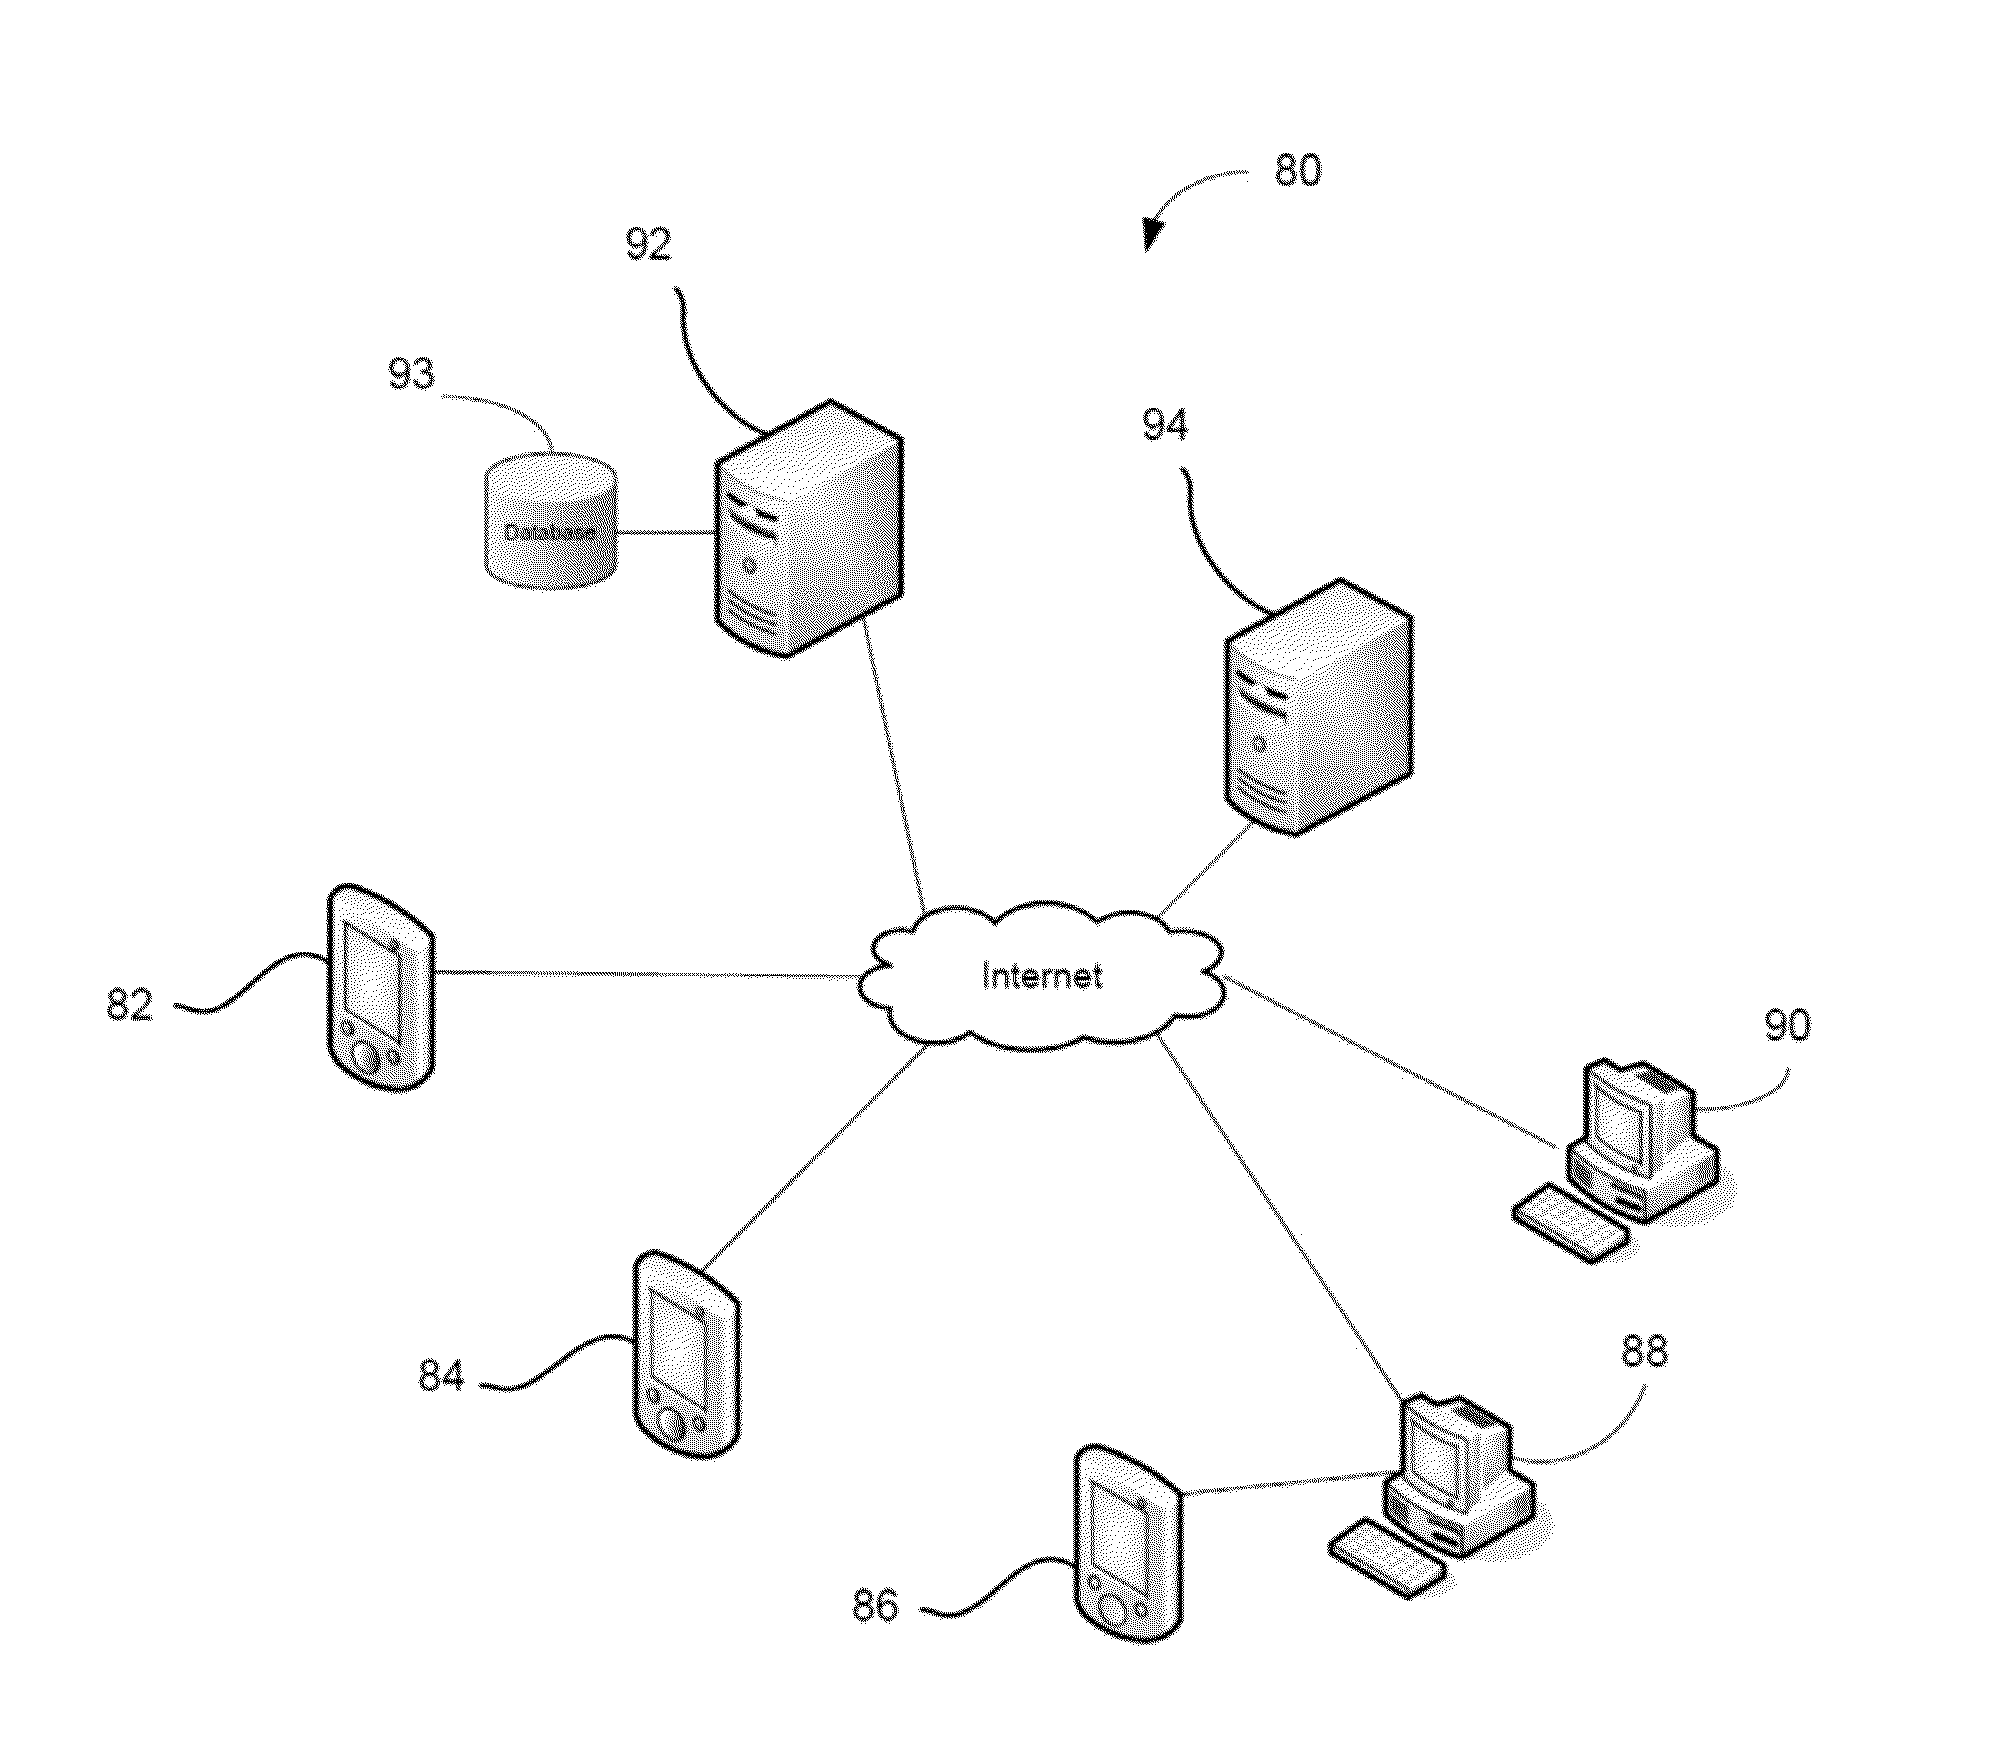 Methods and Systems for Connecting Physical Objects to Digital Communications